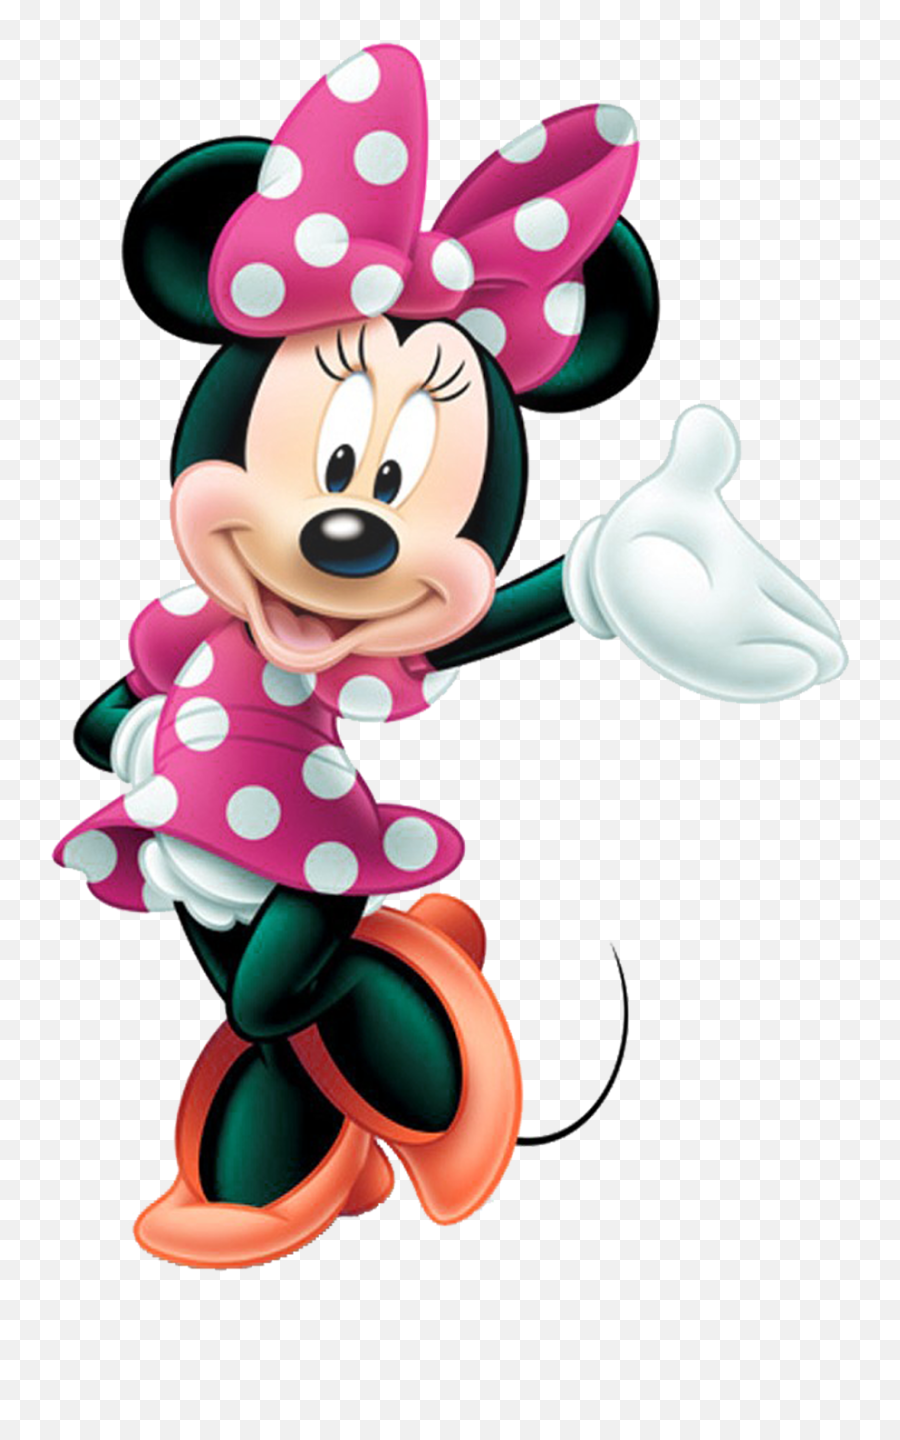 Minnie Mouse Png Images - Minnie Mouse Png Emoji,Minnie Mouse Emoji For Iphone